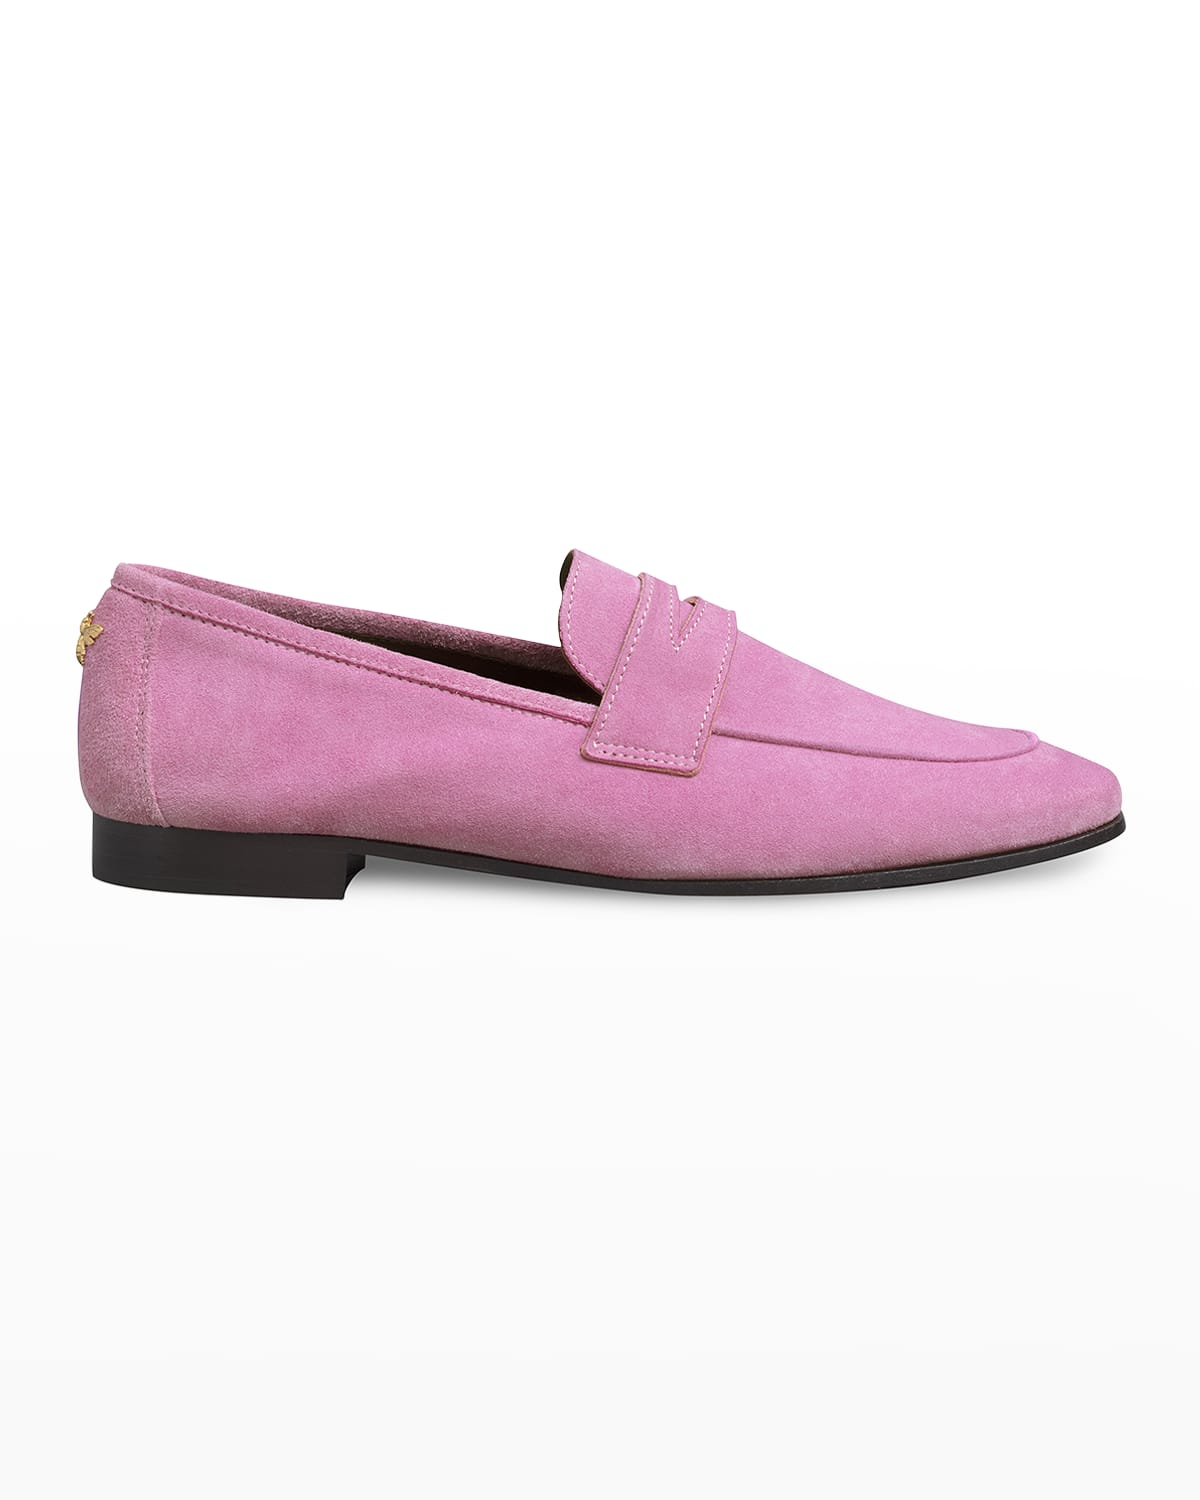 Bougeotte Flaneur Suede Flat Loafers | Neiman Marcus